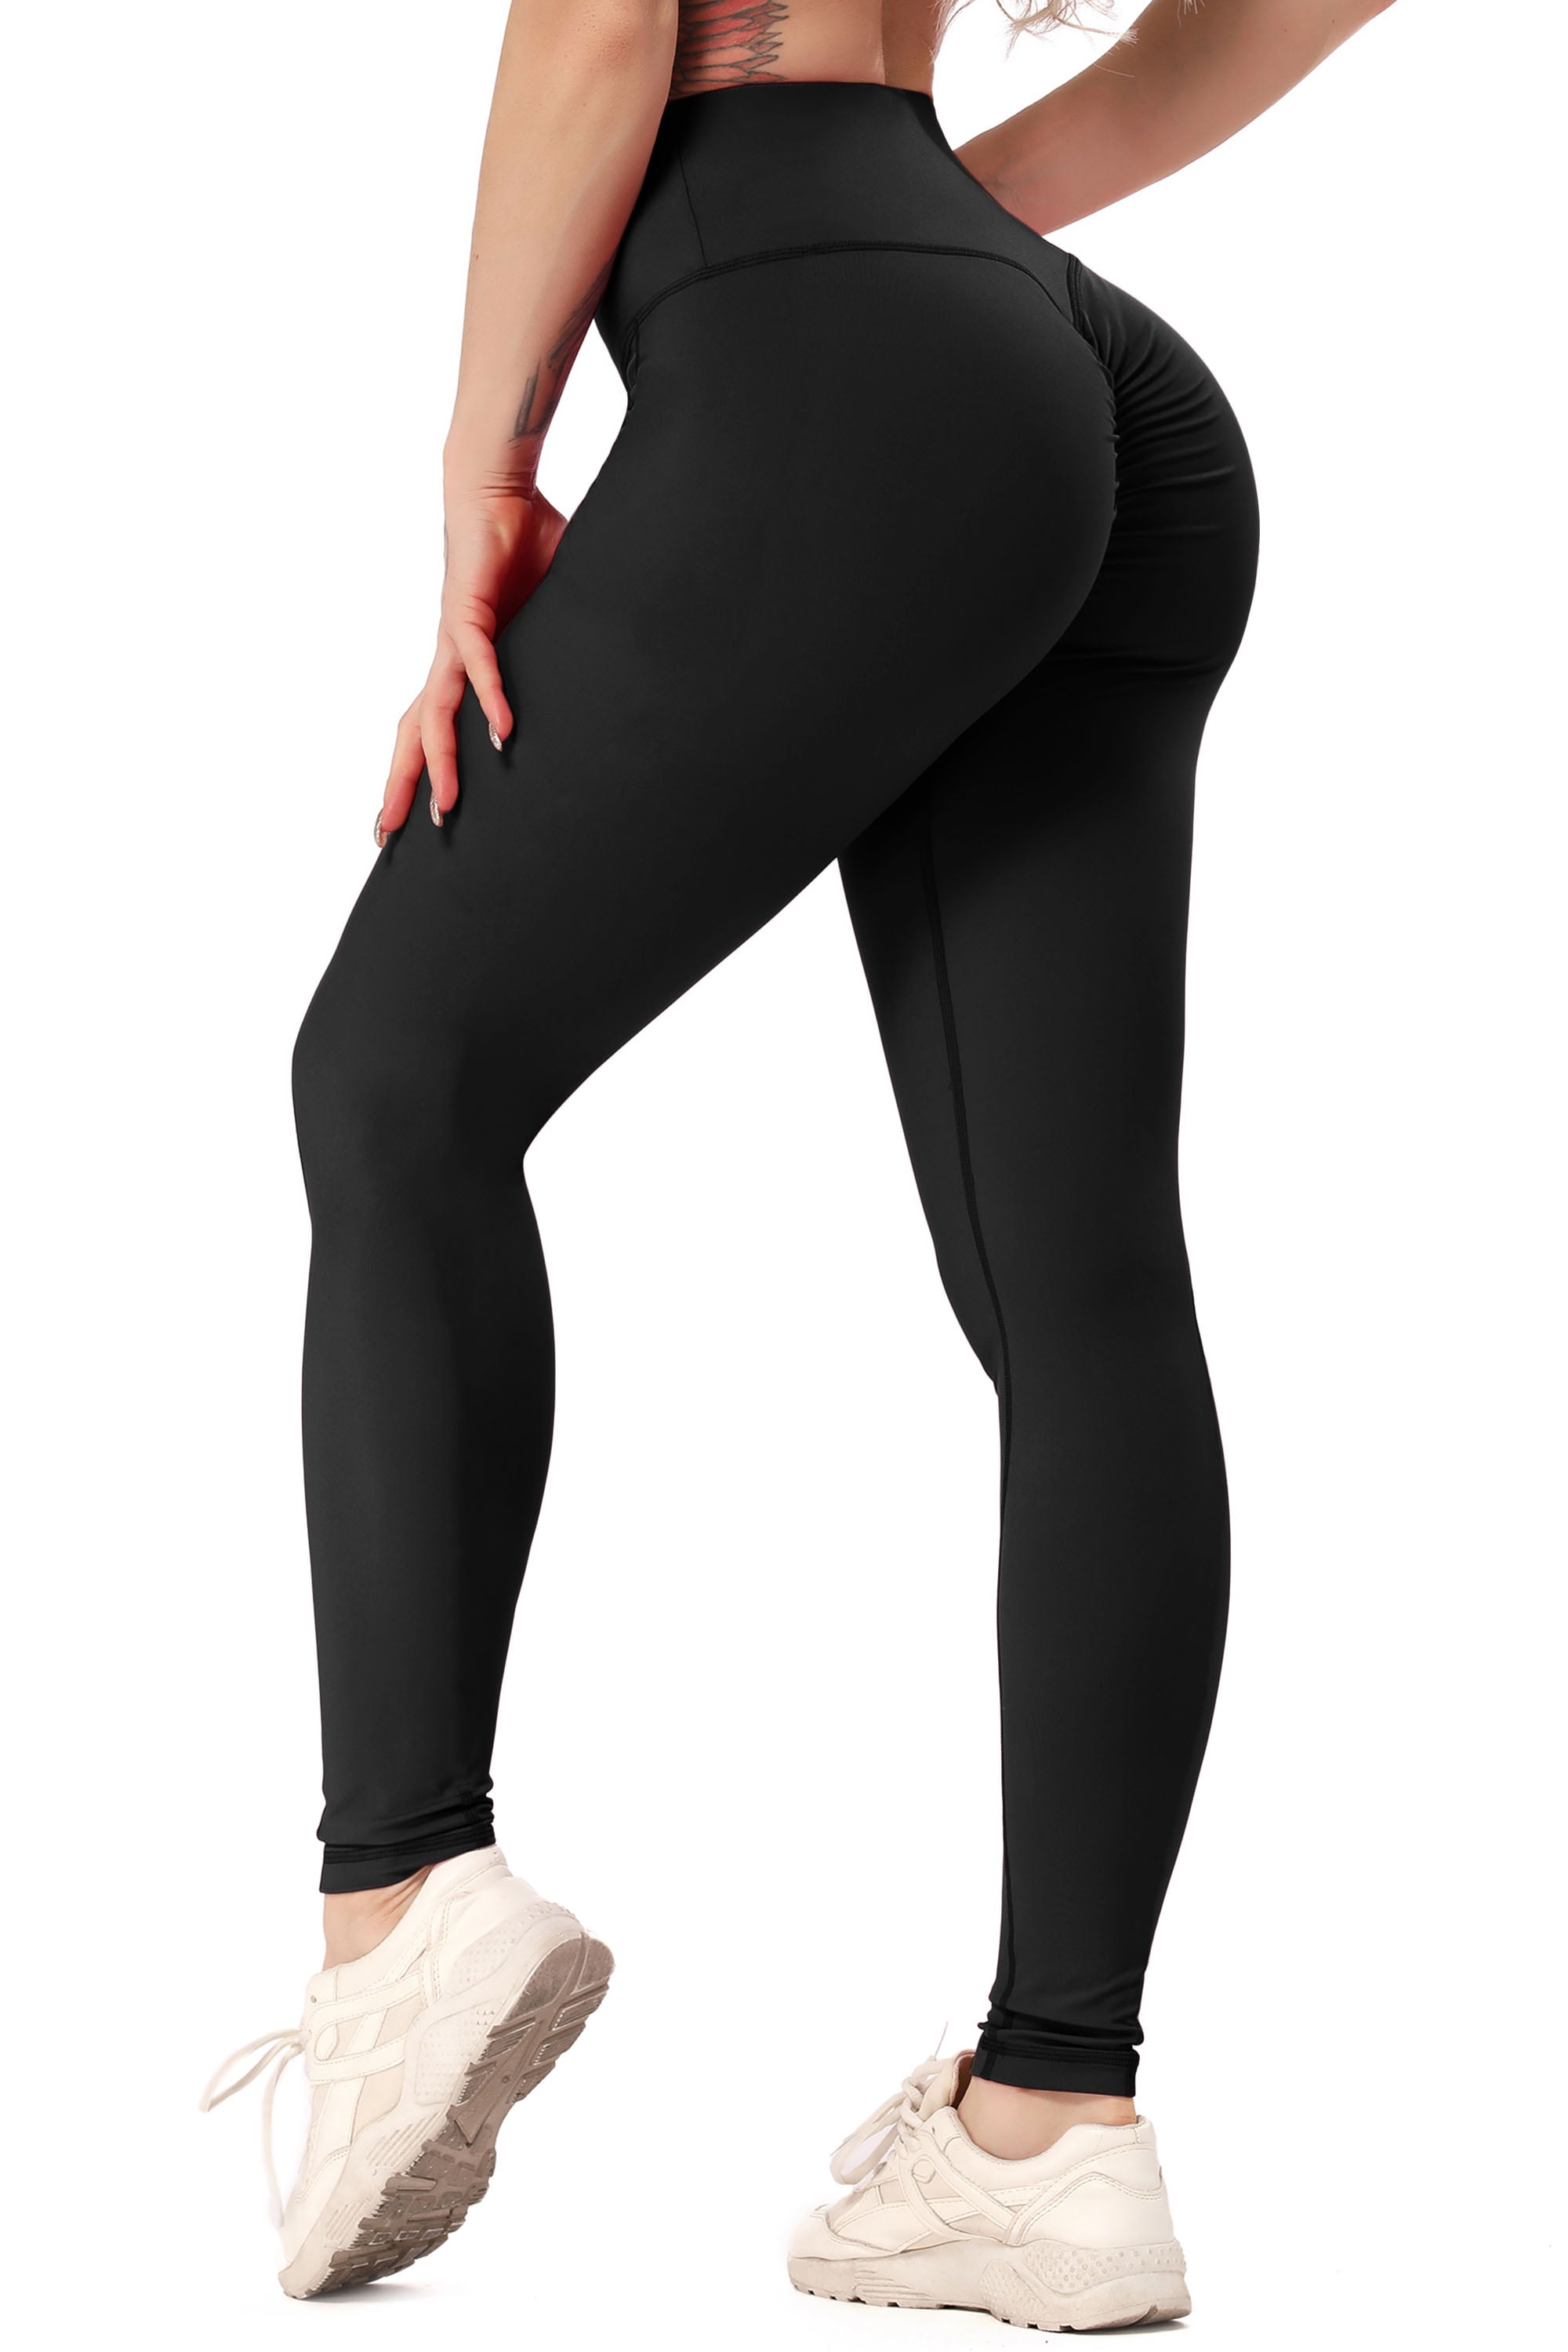 Womens Push Up Yoga Pants Gym Leggings Butt Lift Exercise Workout Train Trousers 